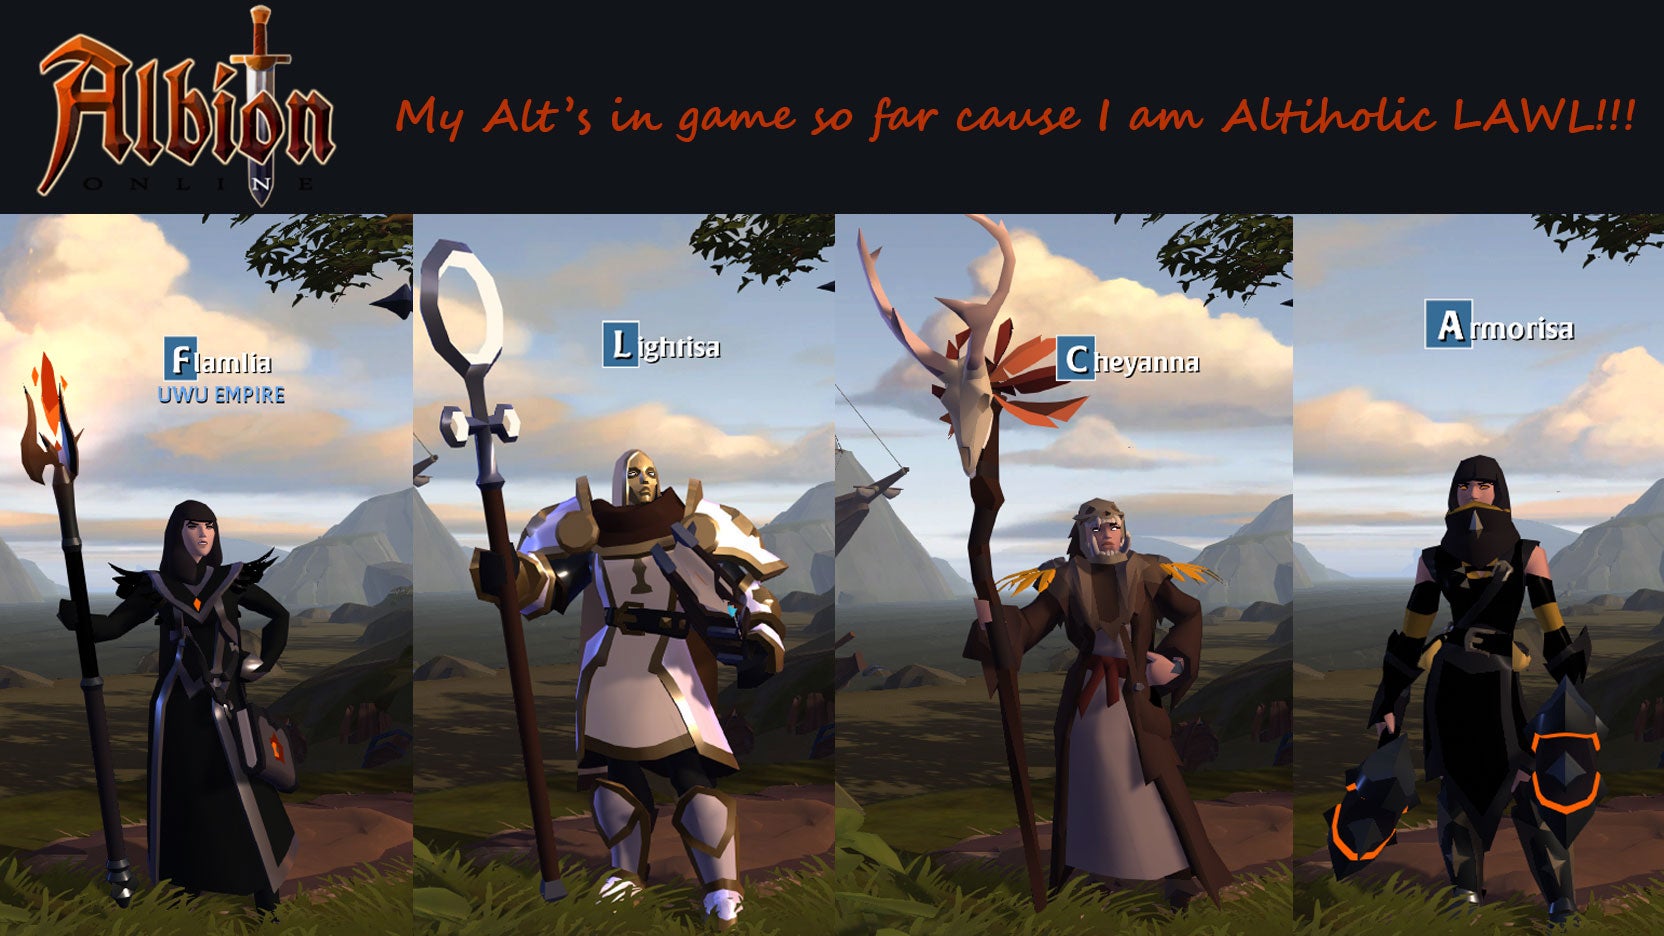 Albion Online Wallpapers